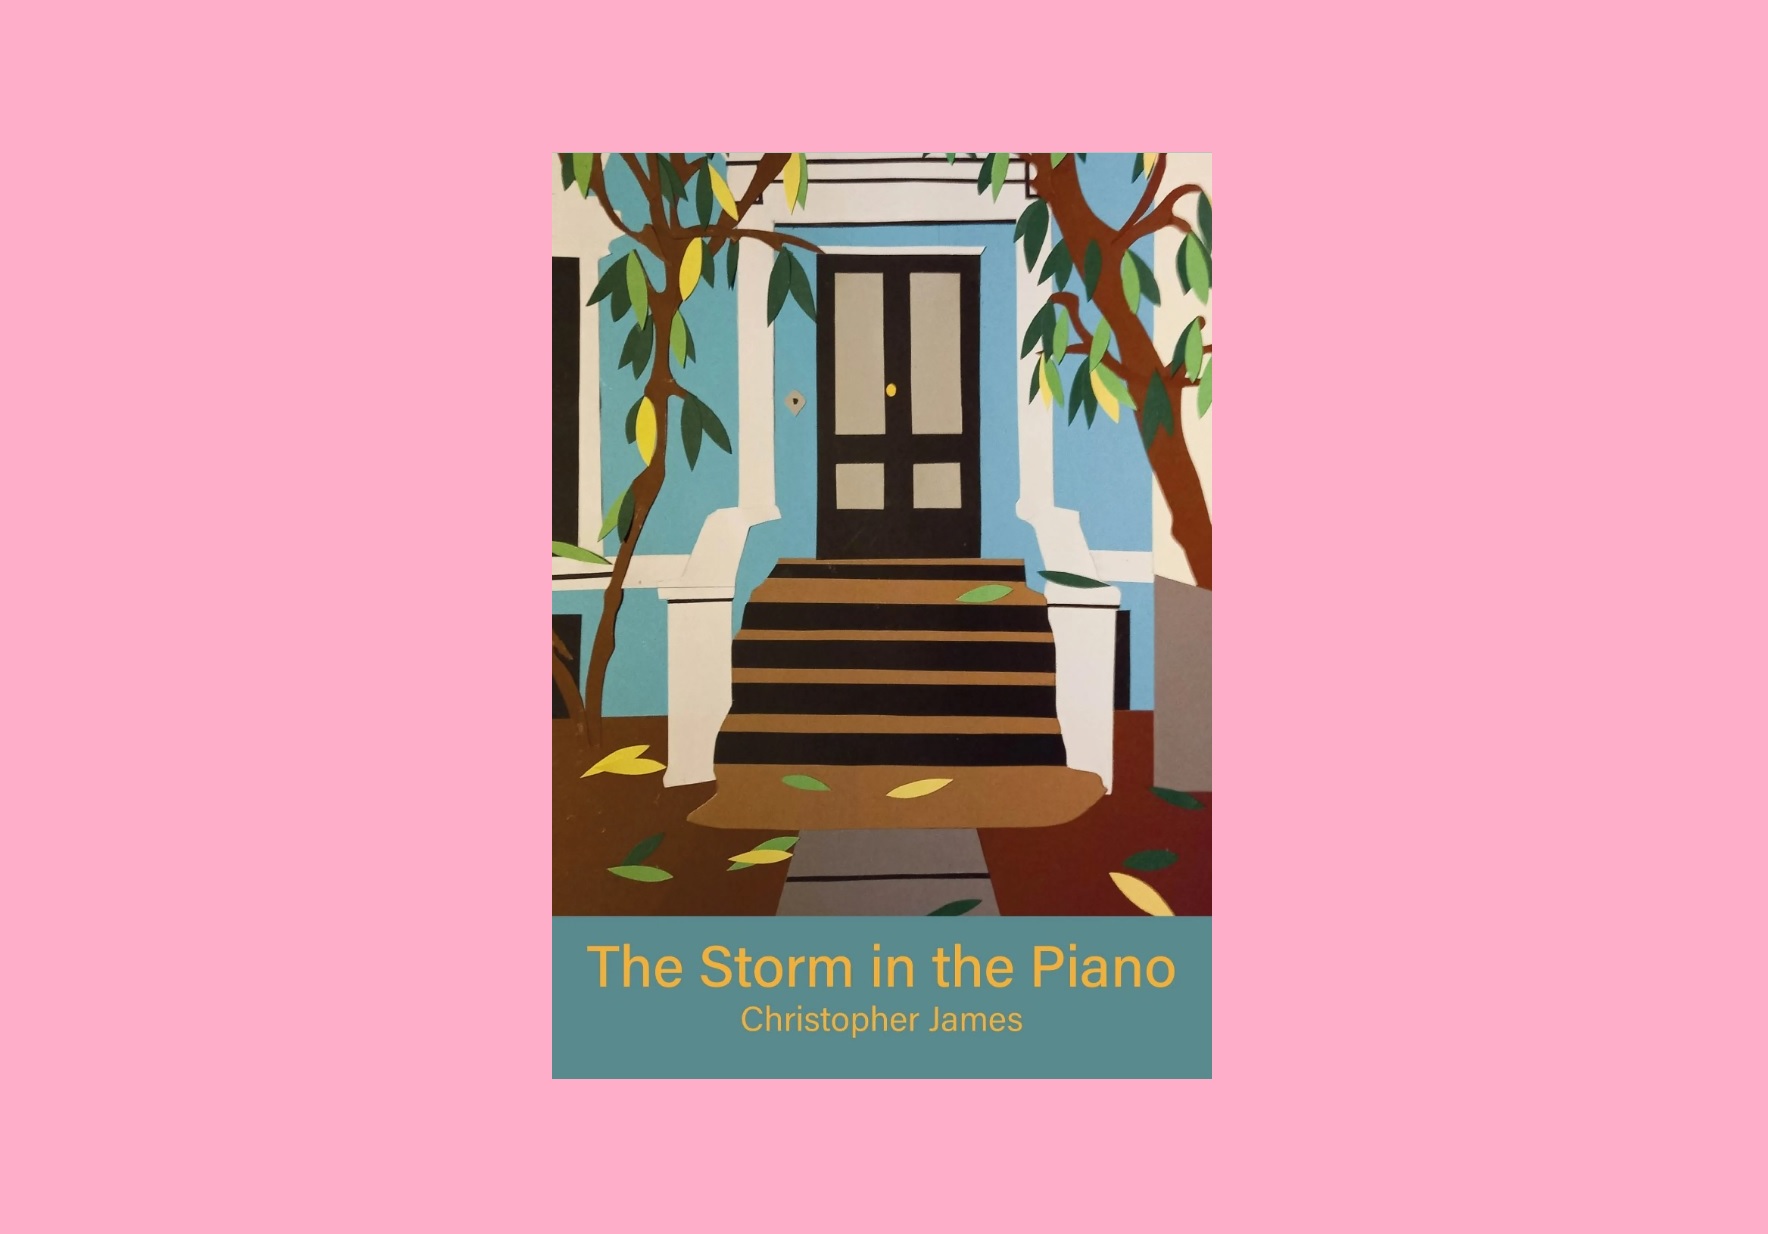 On ‘The Storm in the Piano’ by Christopher James